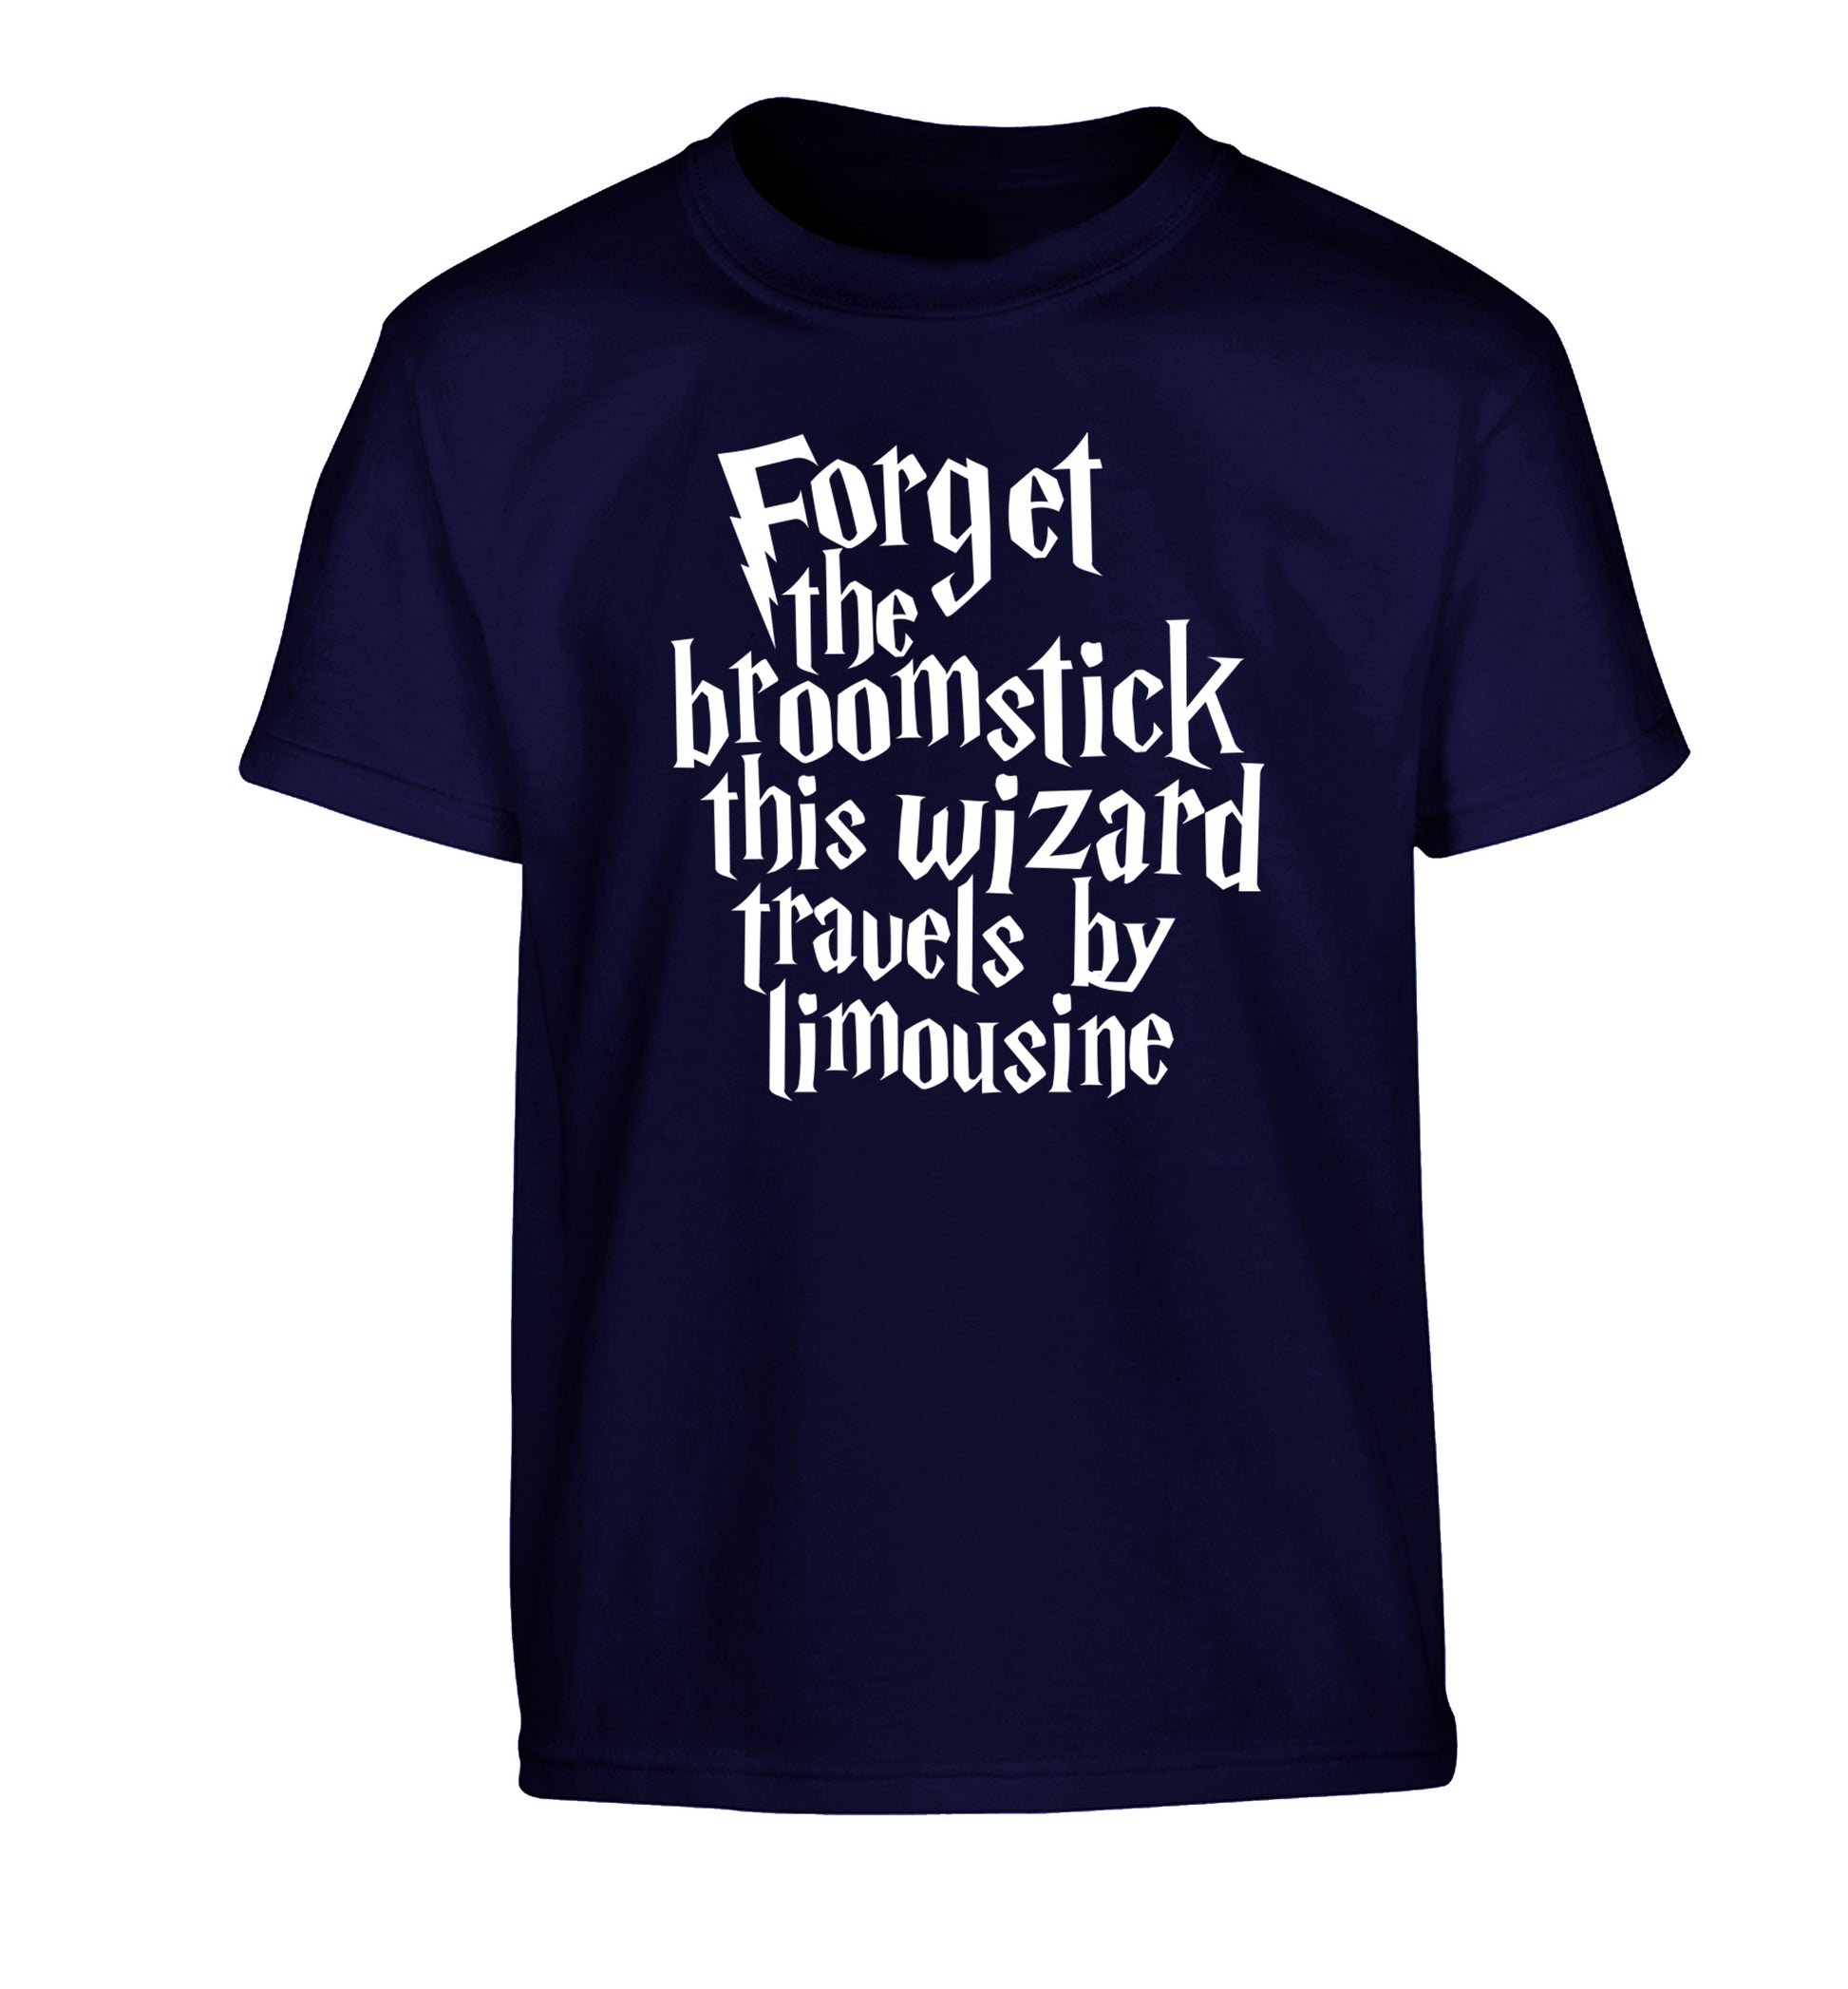 Forget the broomstick this wizard travels by limousine Children's navy Tshirt 12-14 Years